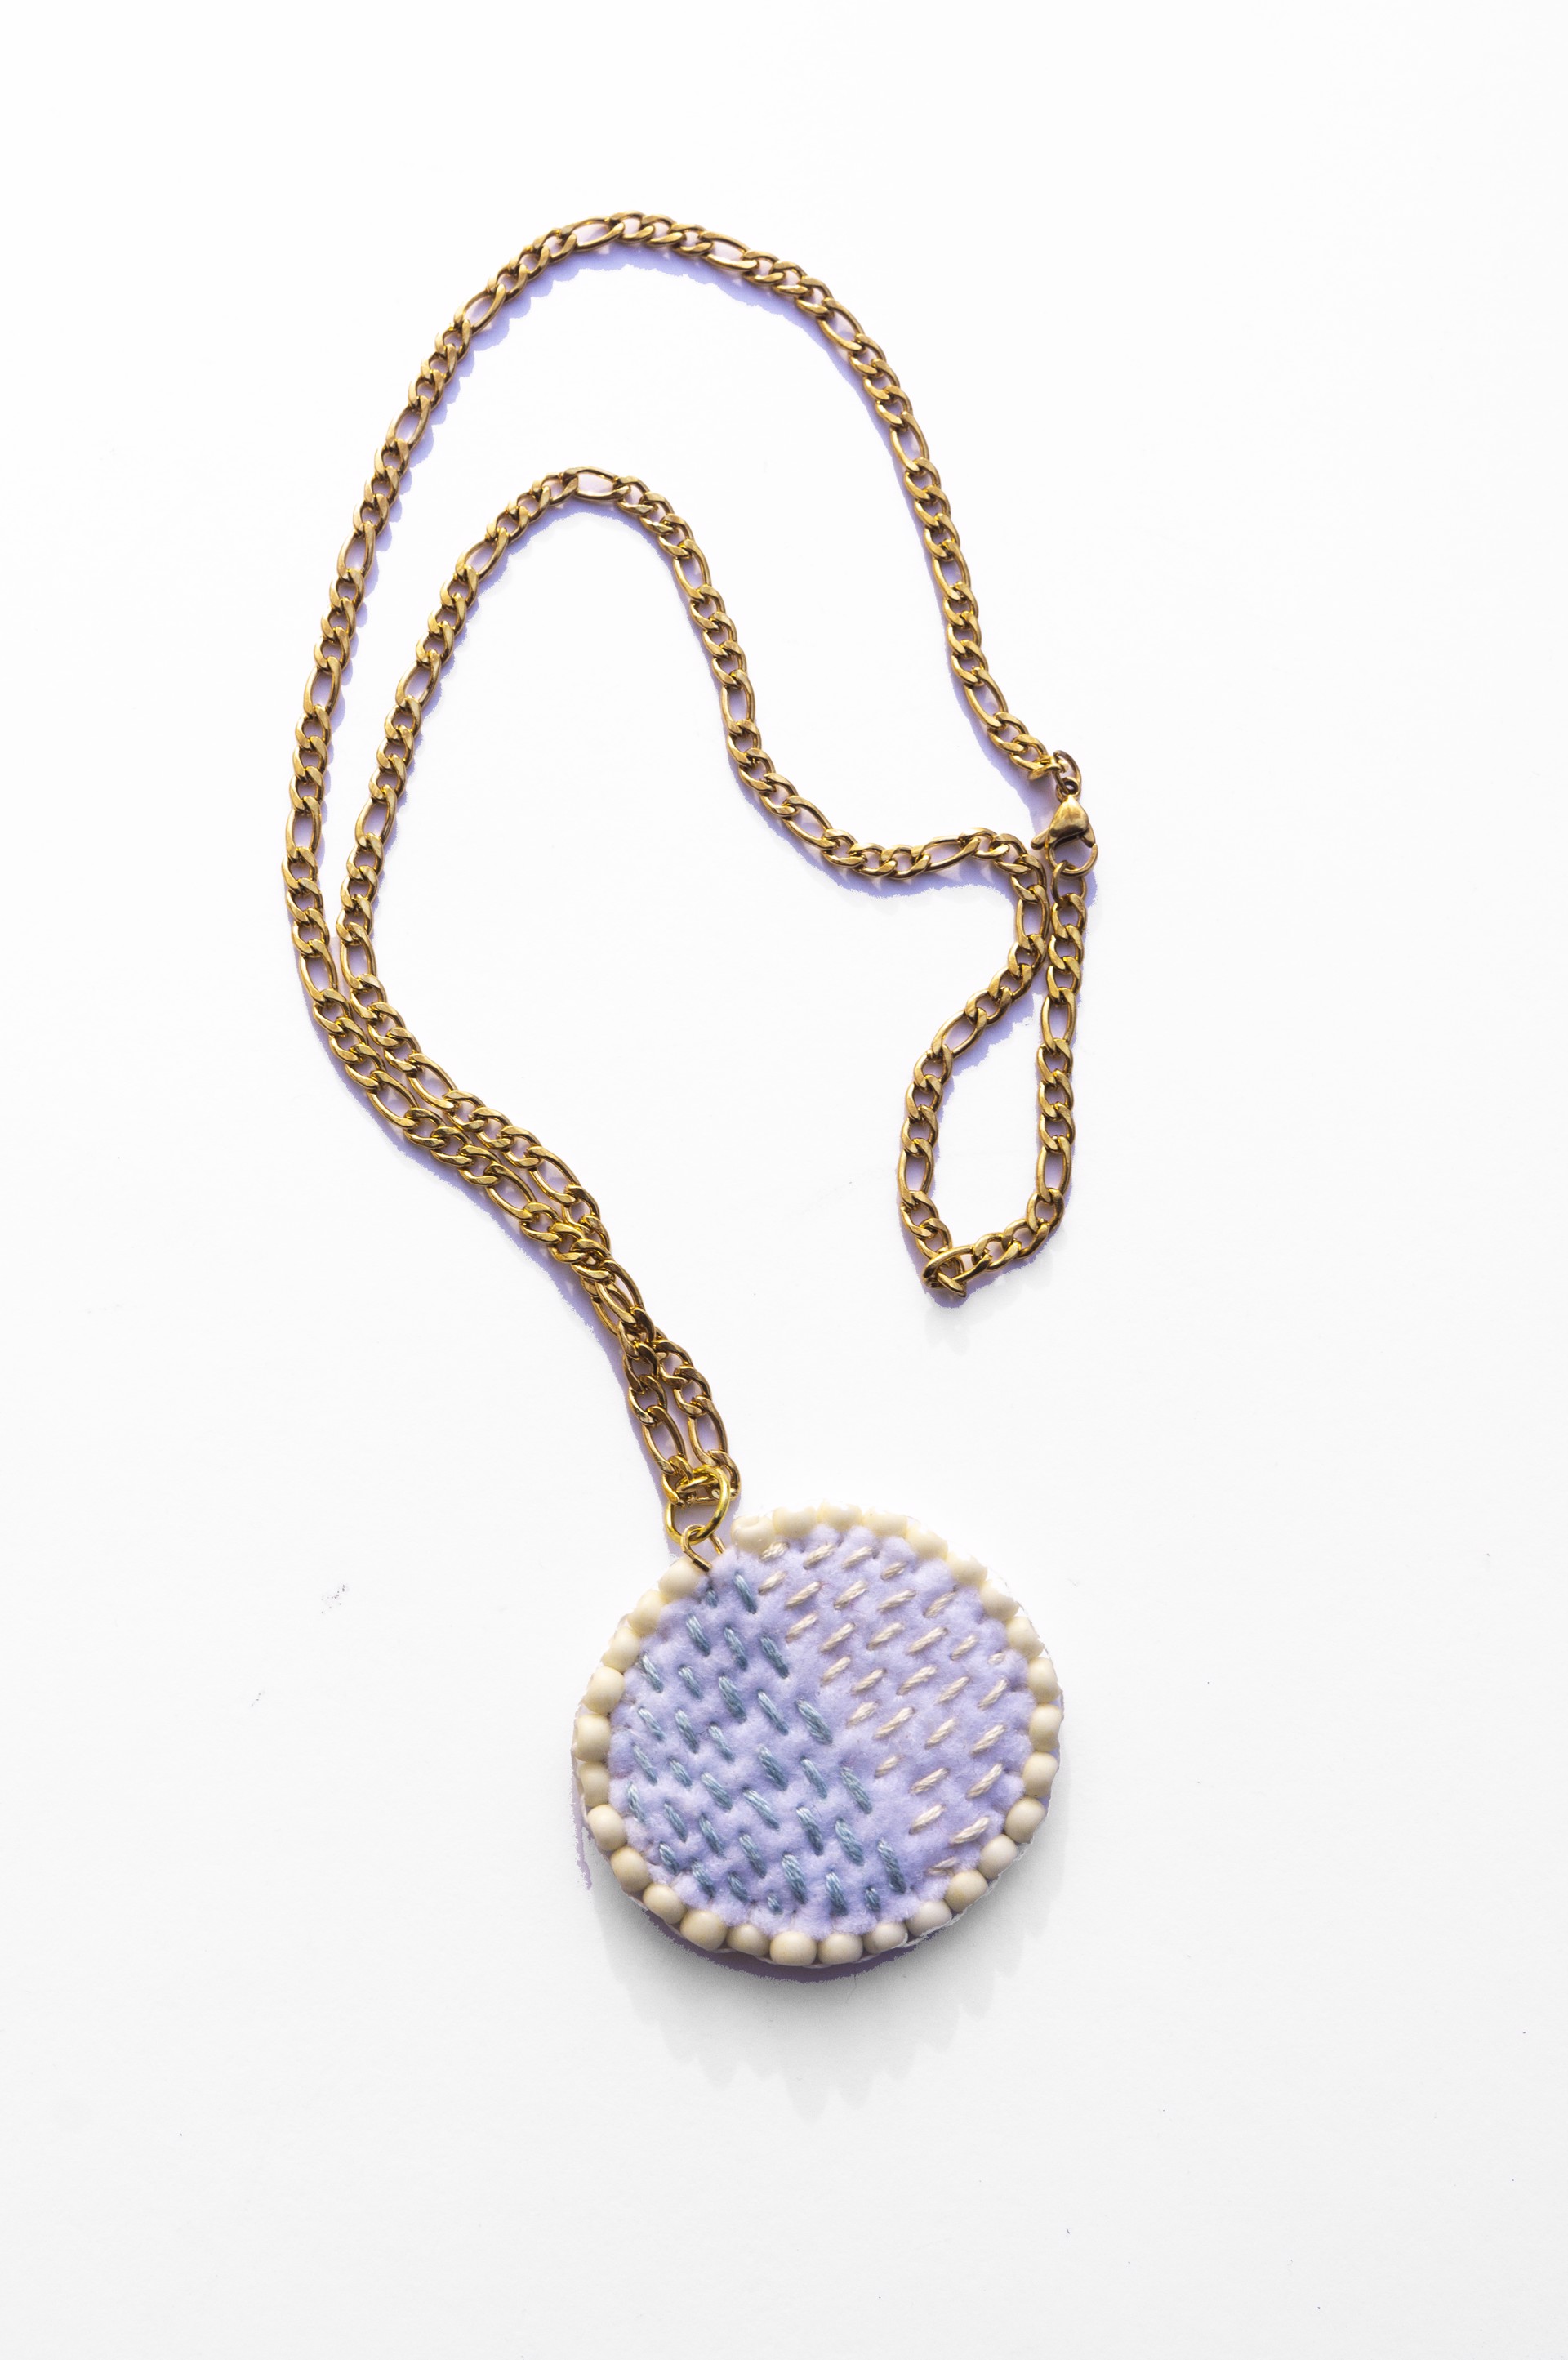 blue and white necklace by Hattie Lee